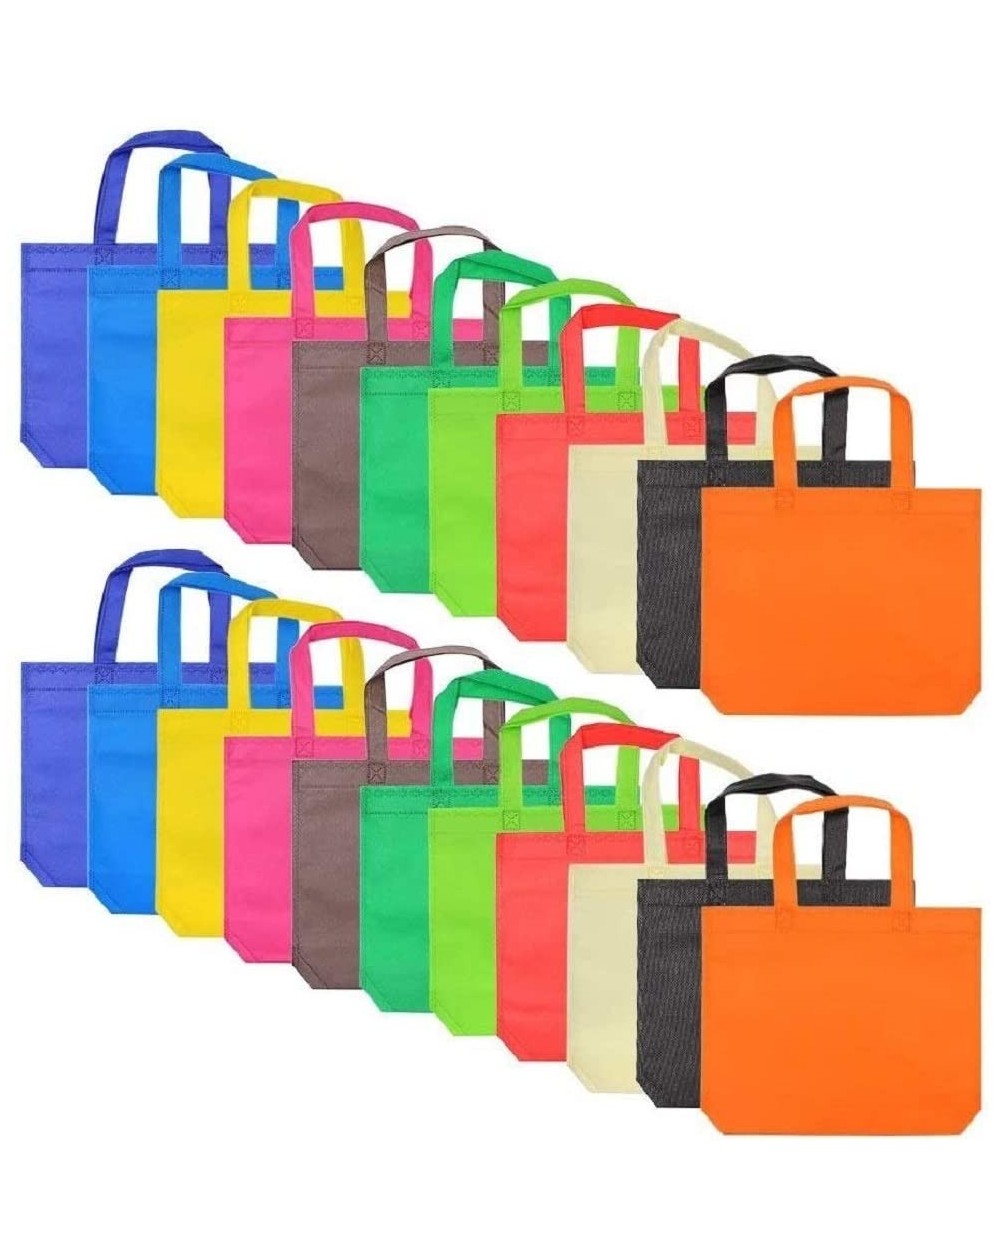 Party Packs Multi Color- Bright Neon Colors- Flat Reusable Gift Bags with Handles- Eco Friendly Tote Bags- Party Favor Bags f...